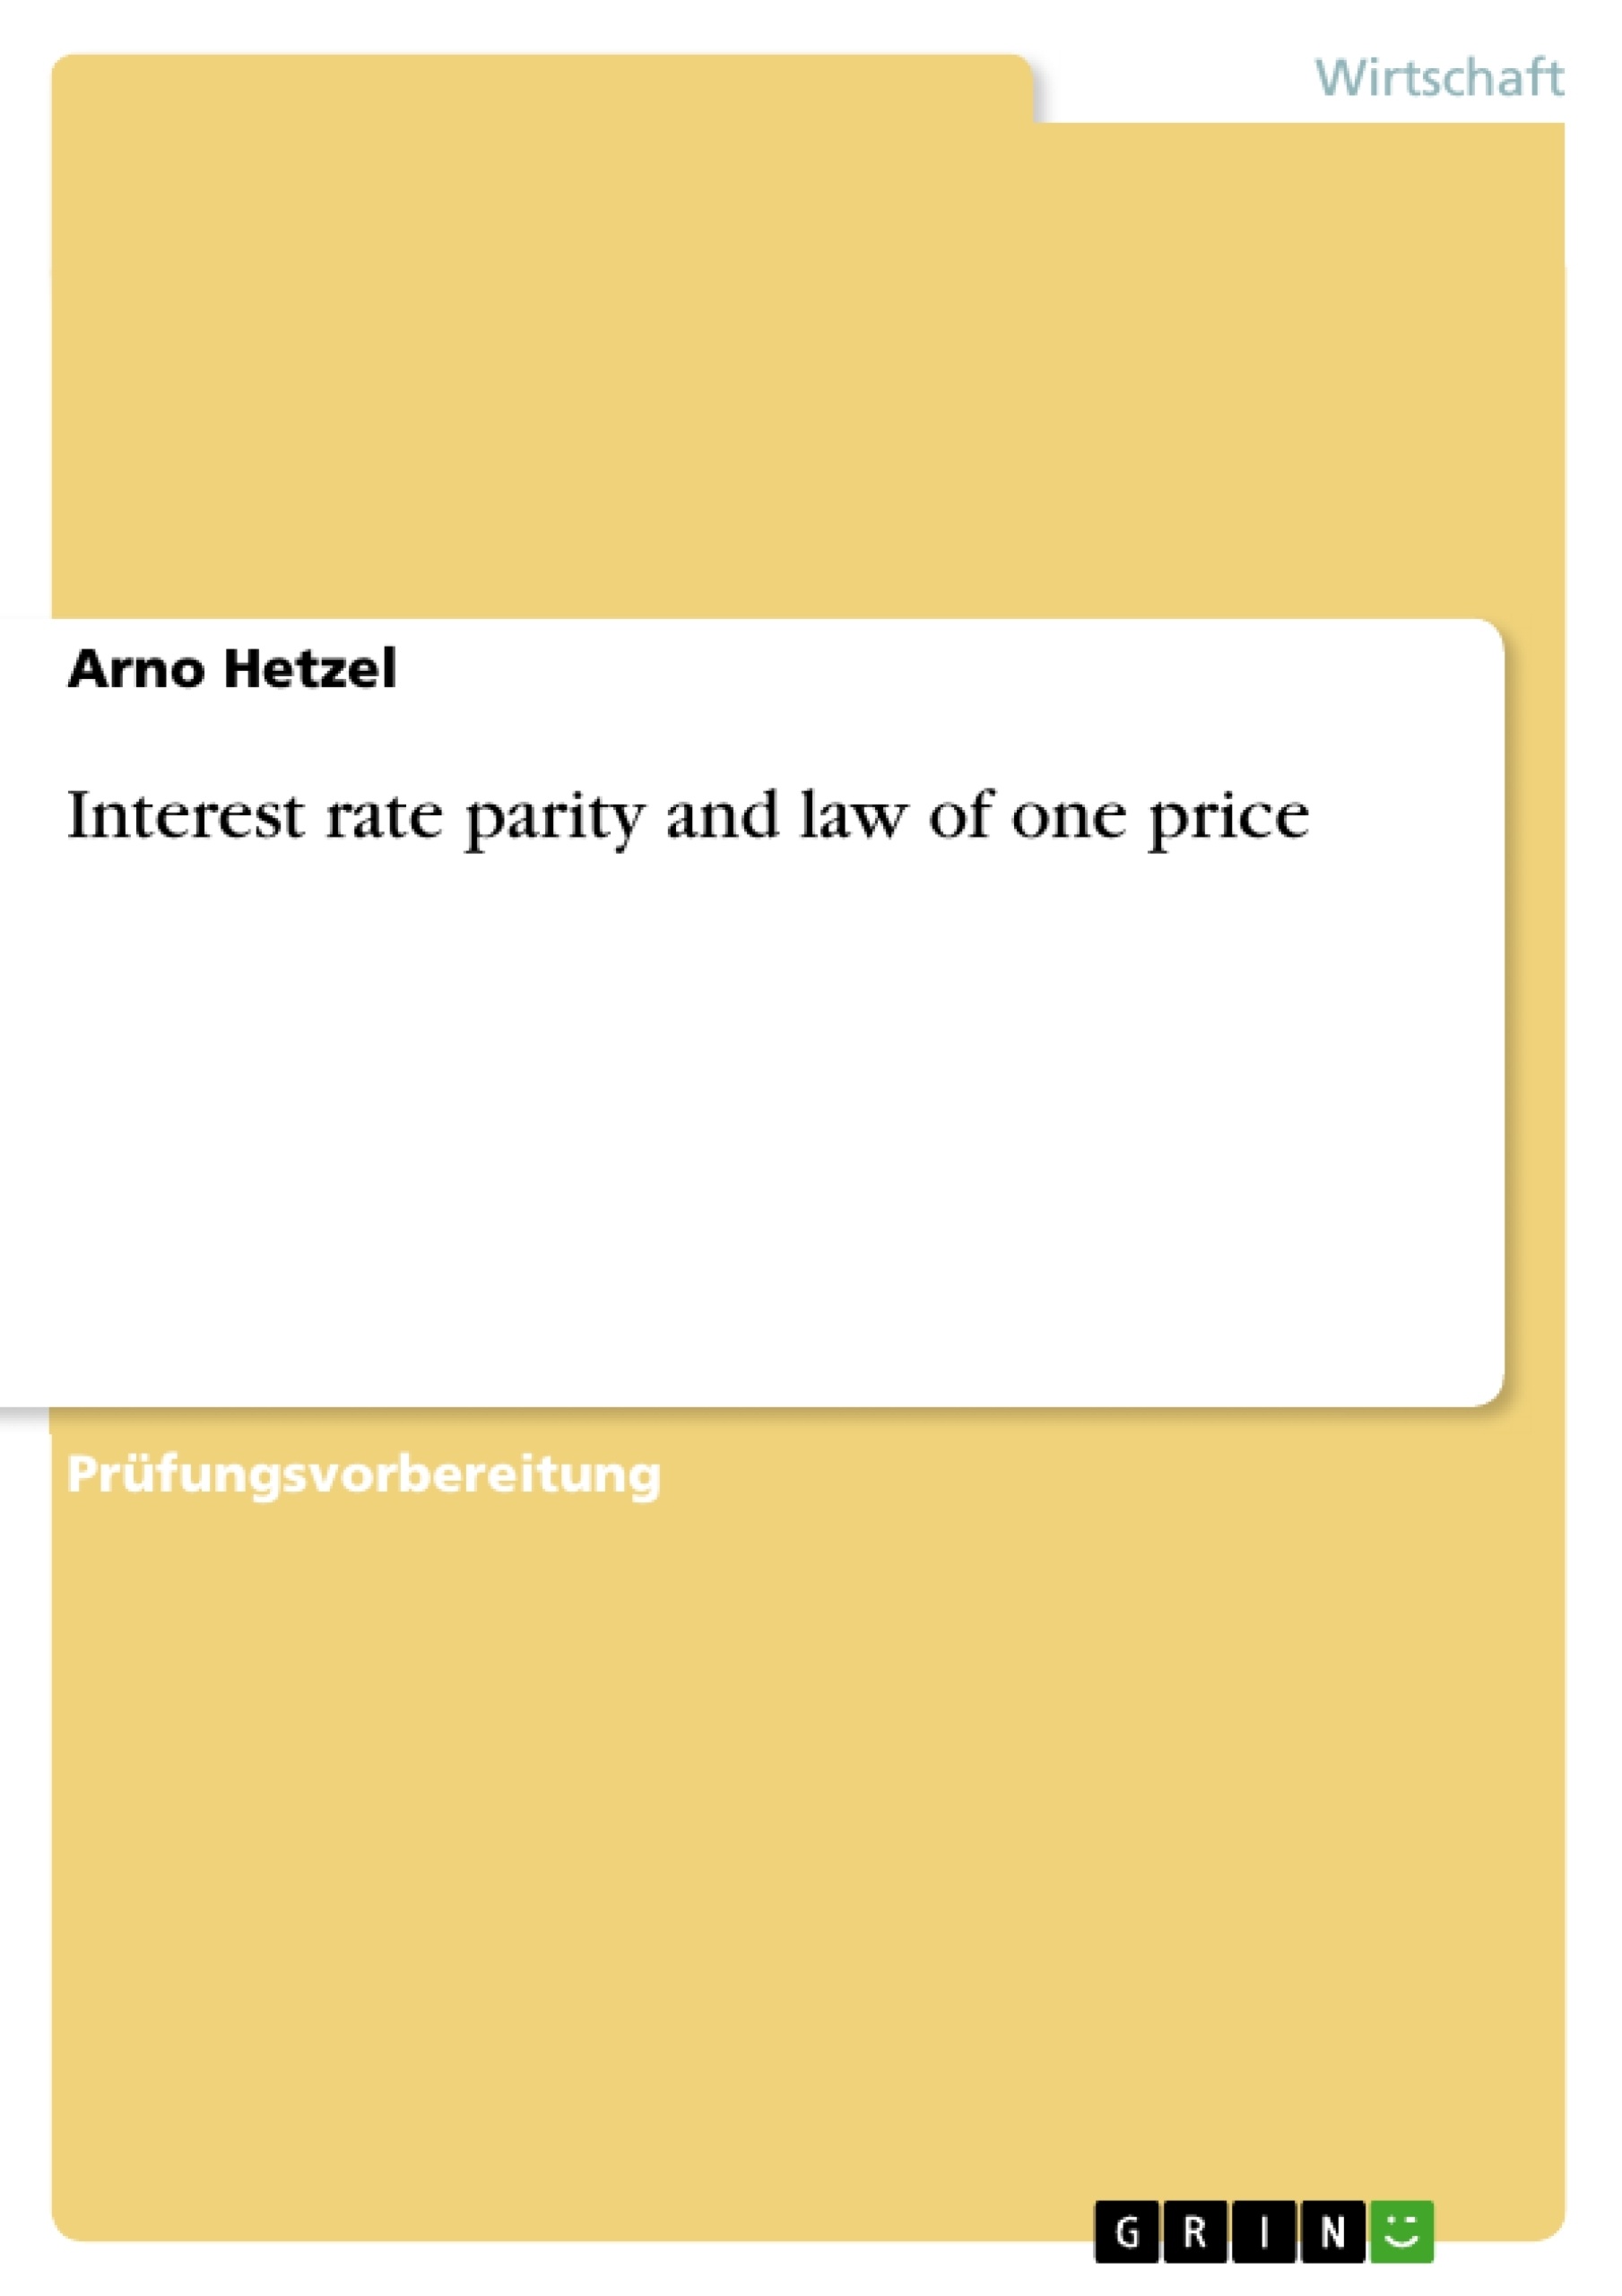 Título: Interest rate parity and law of one price